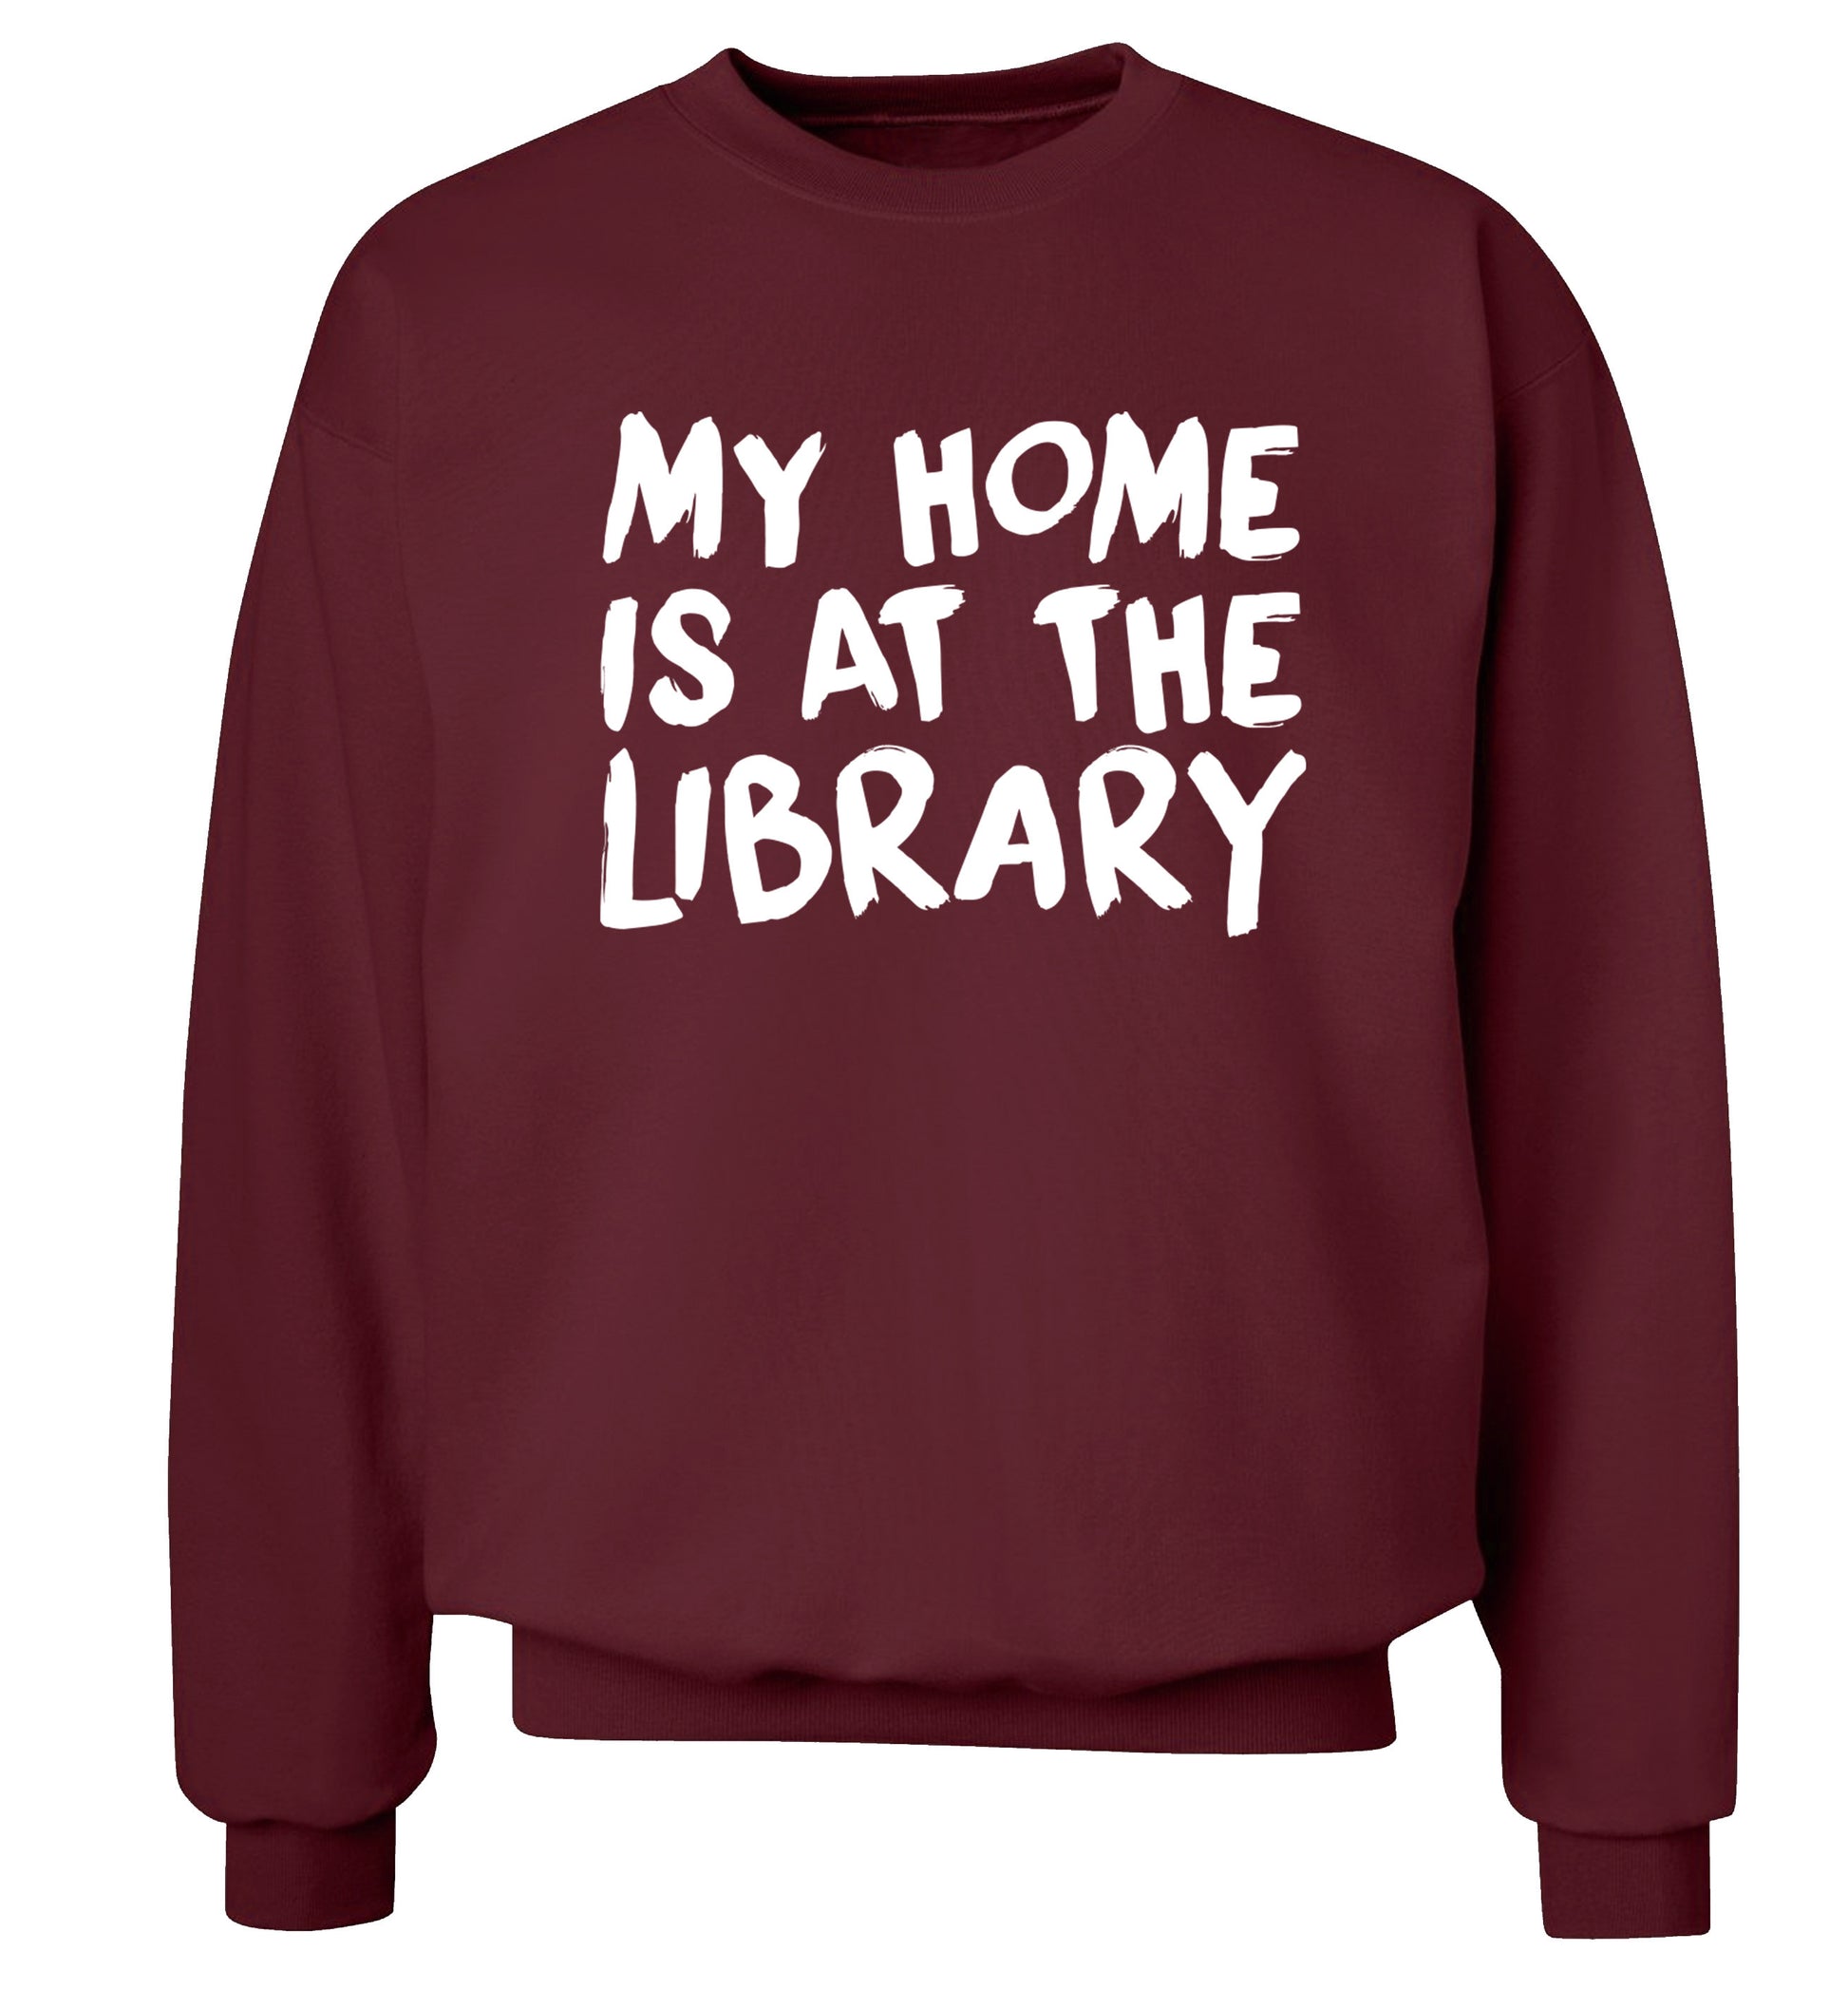 My home is at the library Adult's unisex maroon Sweater 2XL